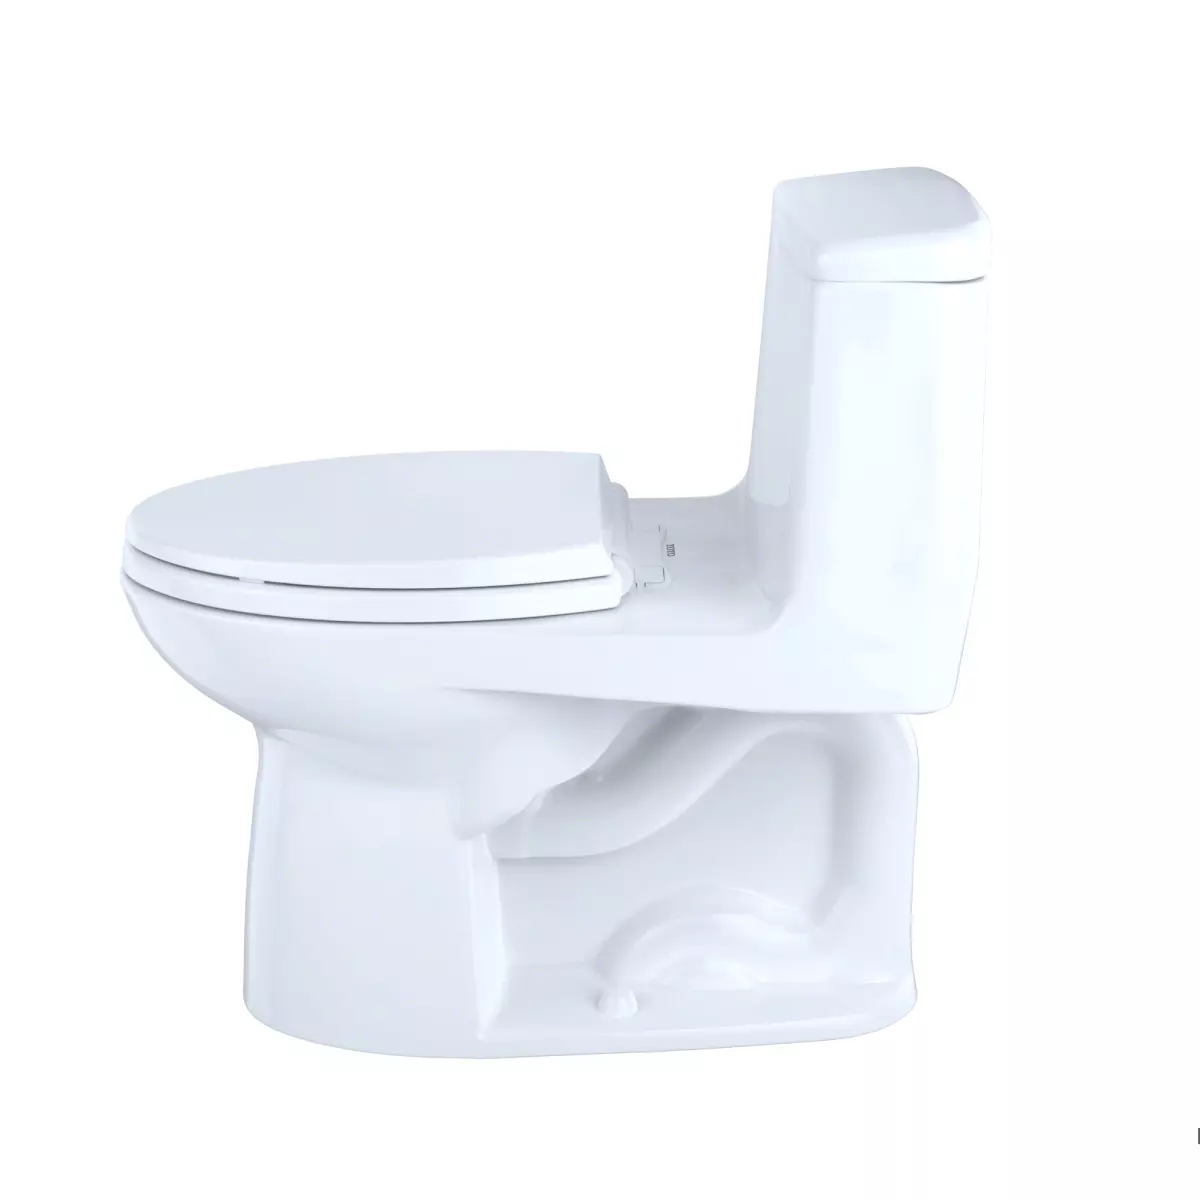 Toto MS854114ELG#01 - Eco UltraMax One-Piece Elongated 1.28 GPF ADA Compliant Toilet with CeFiONtect